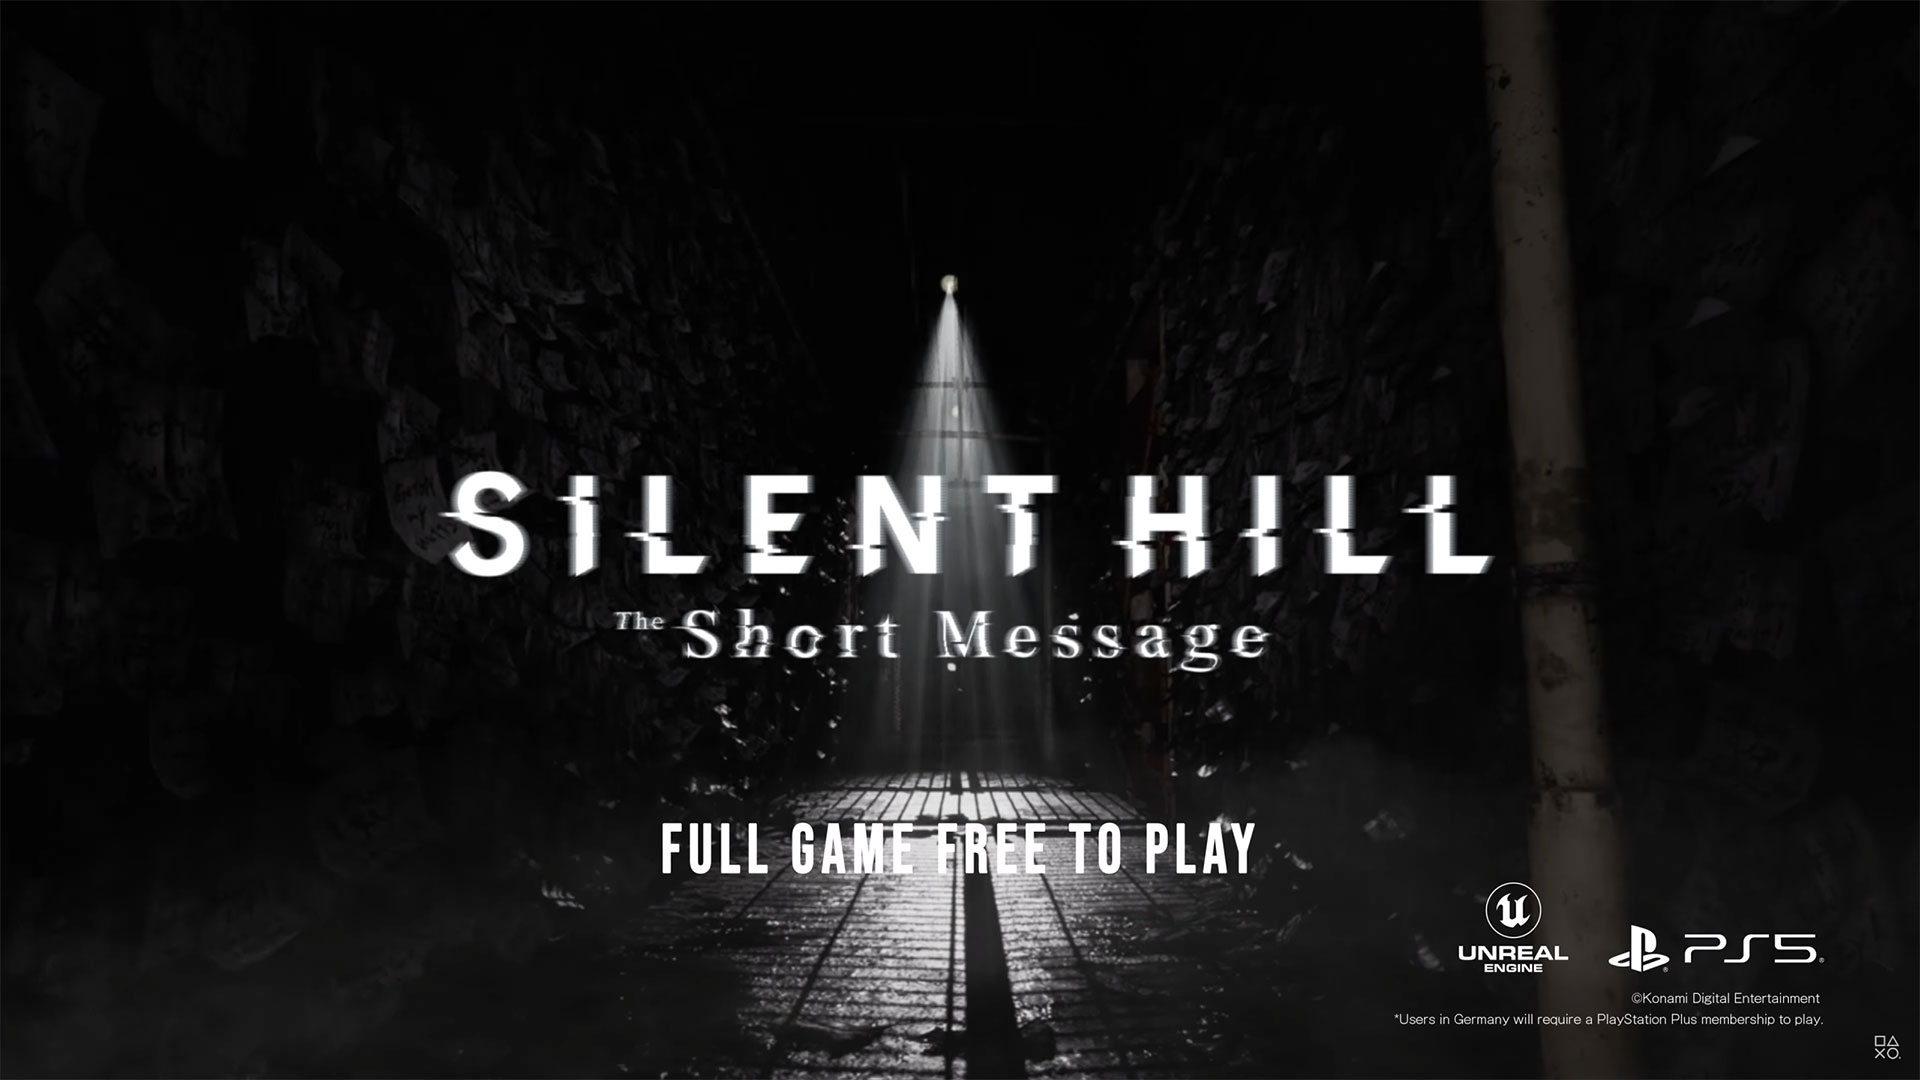 Silent Hill: The Short Message is available for free, starting today